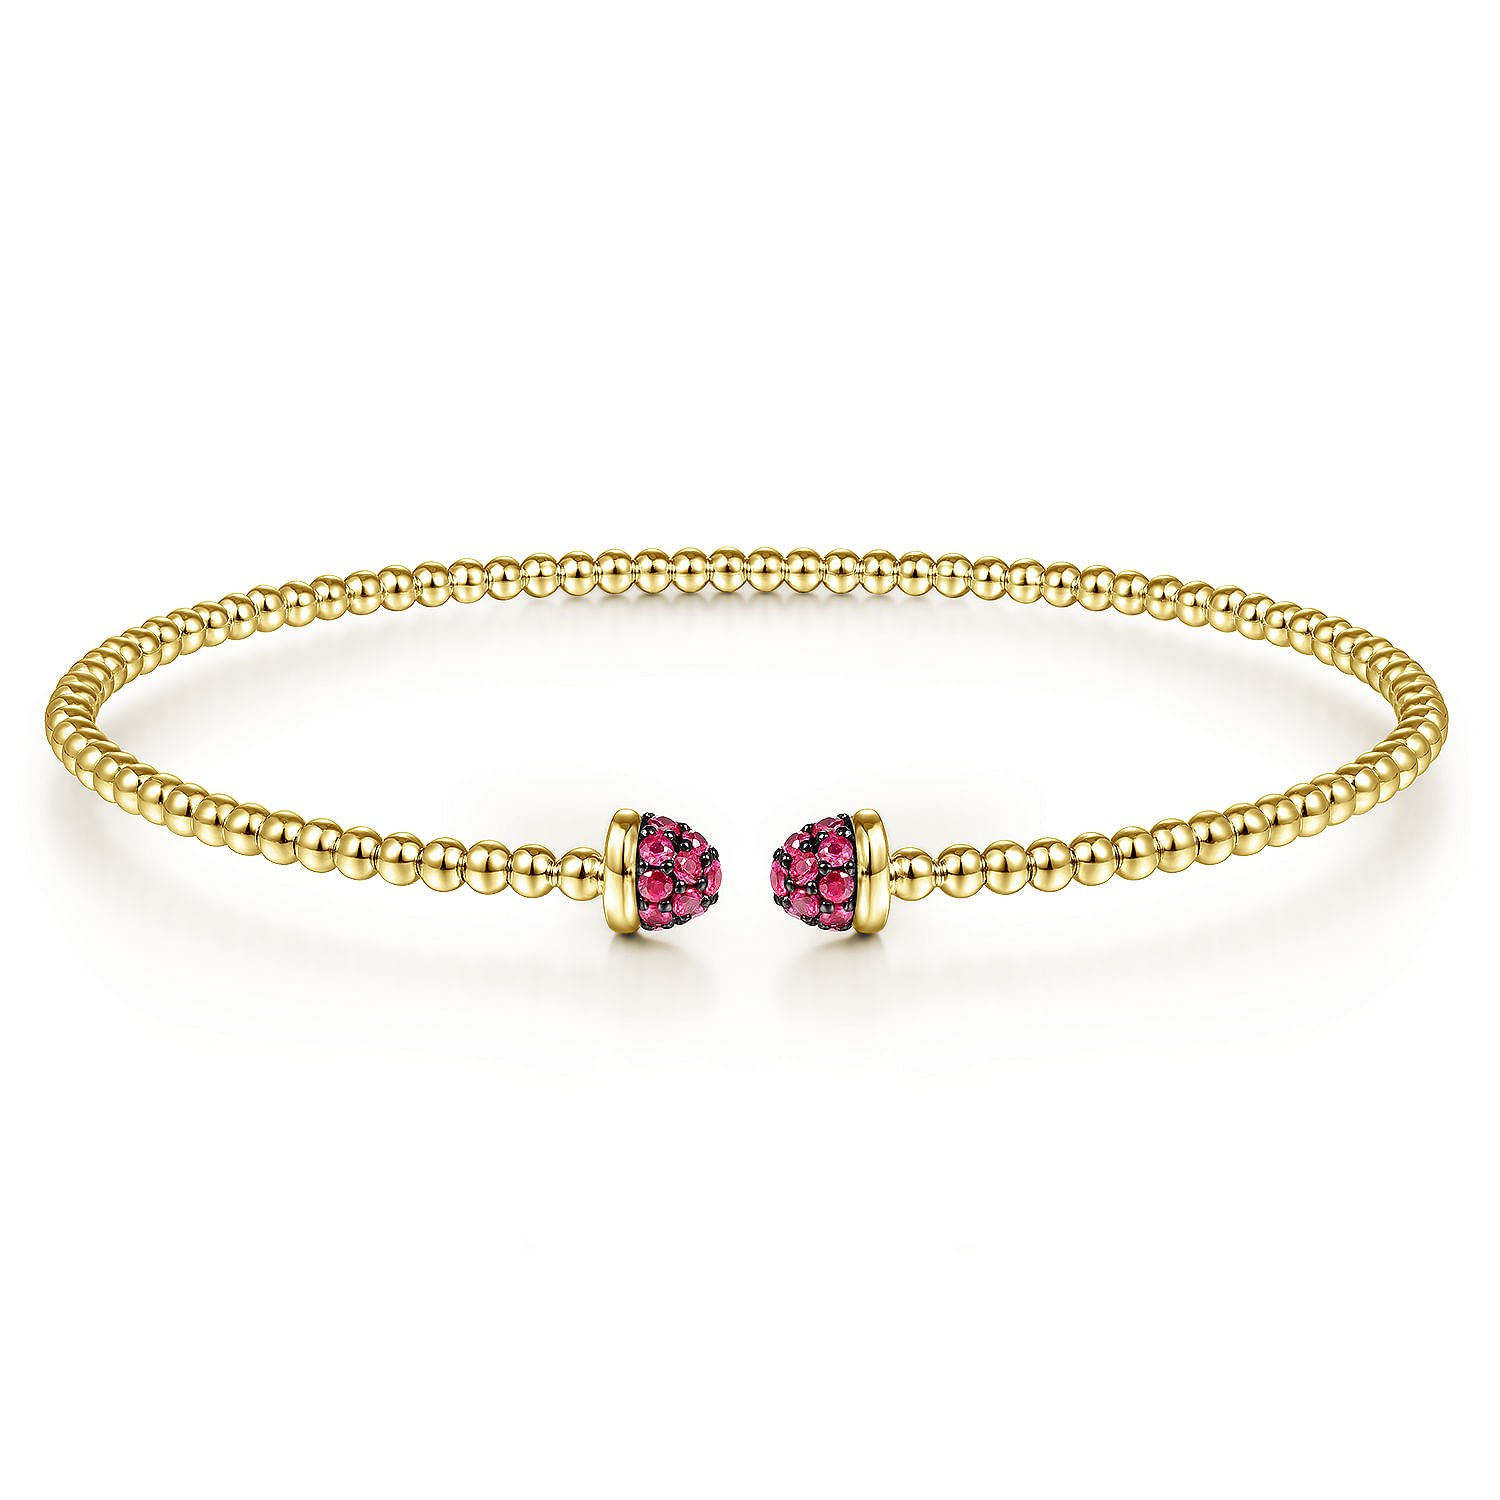 14K Yellow Gold Bujukan Bead Cuff Bracelet with Ruby Pave Caps